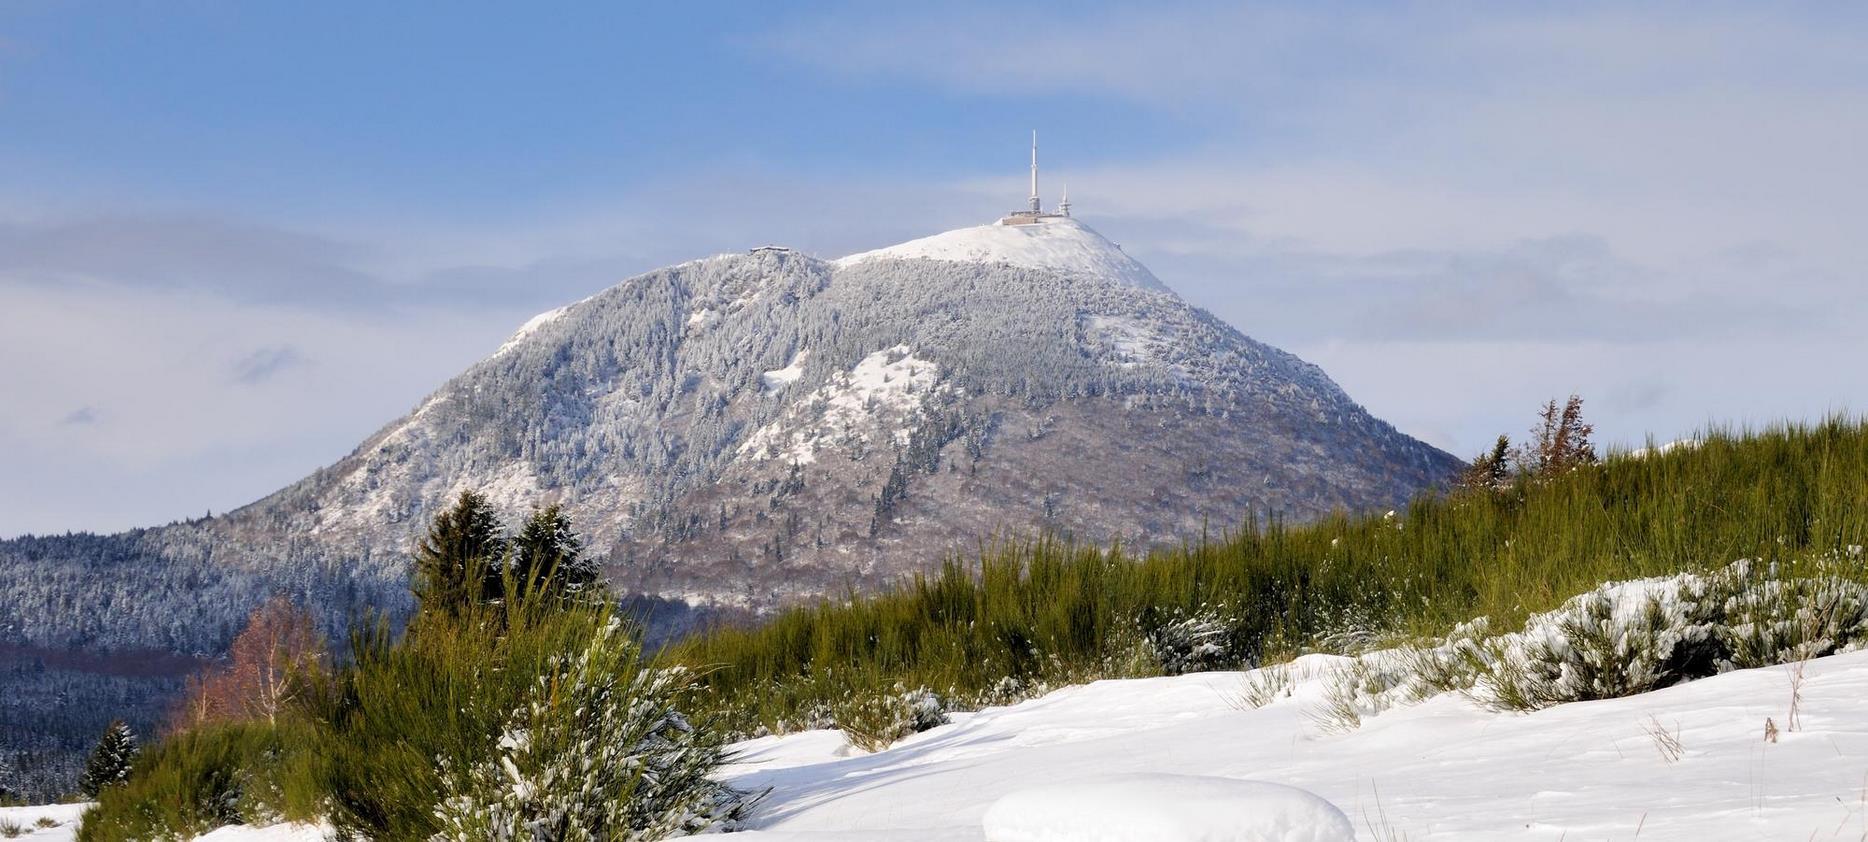 The Puy de Dome in Winter - Great sites of France